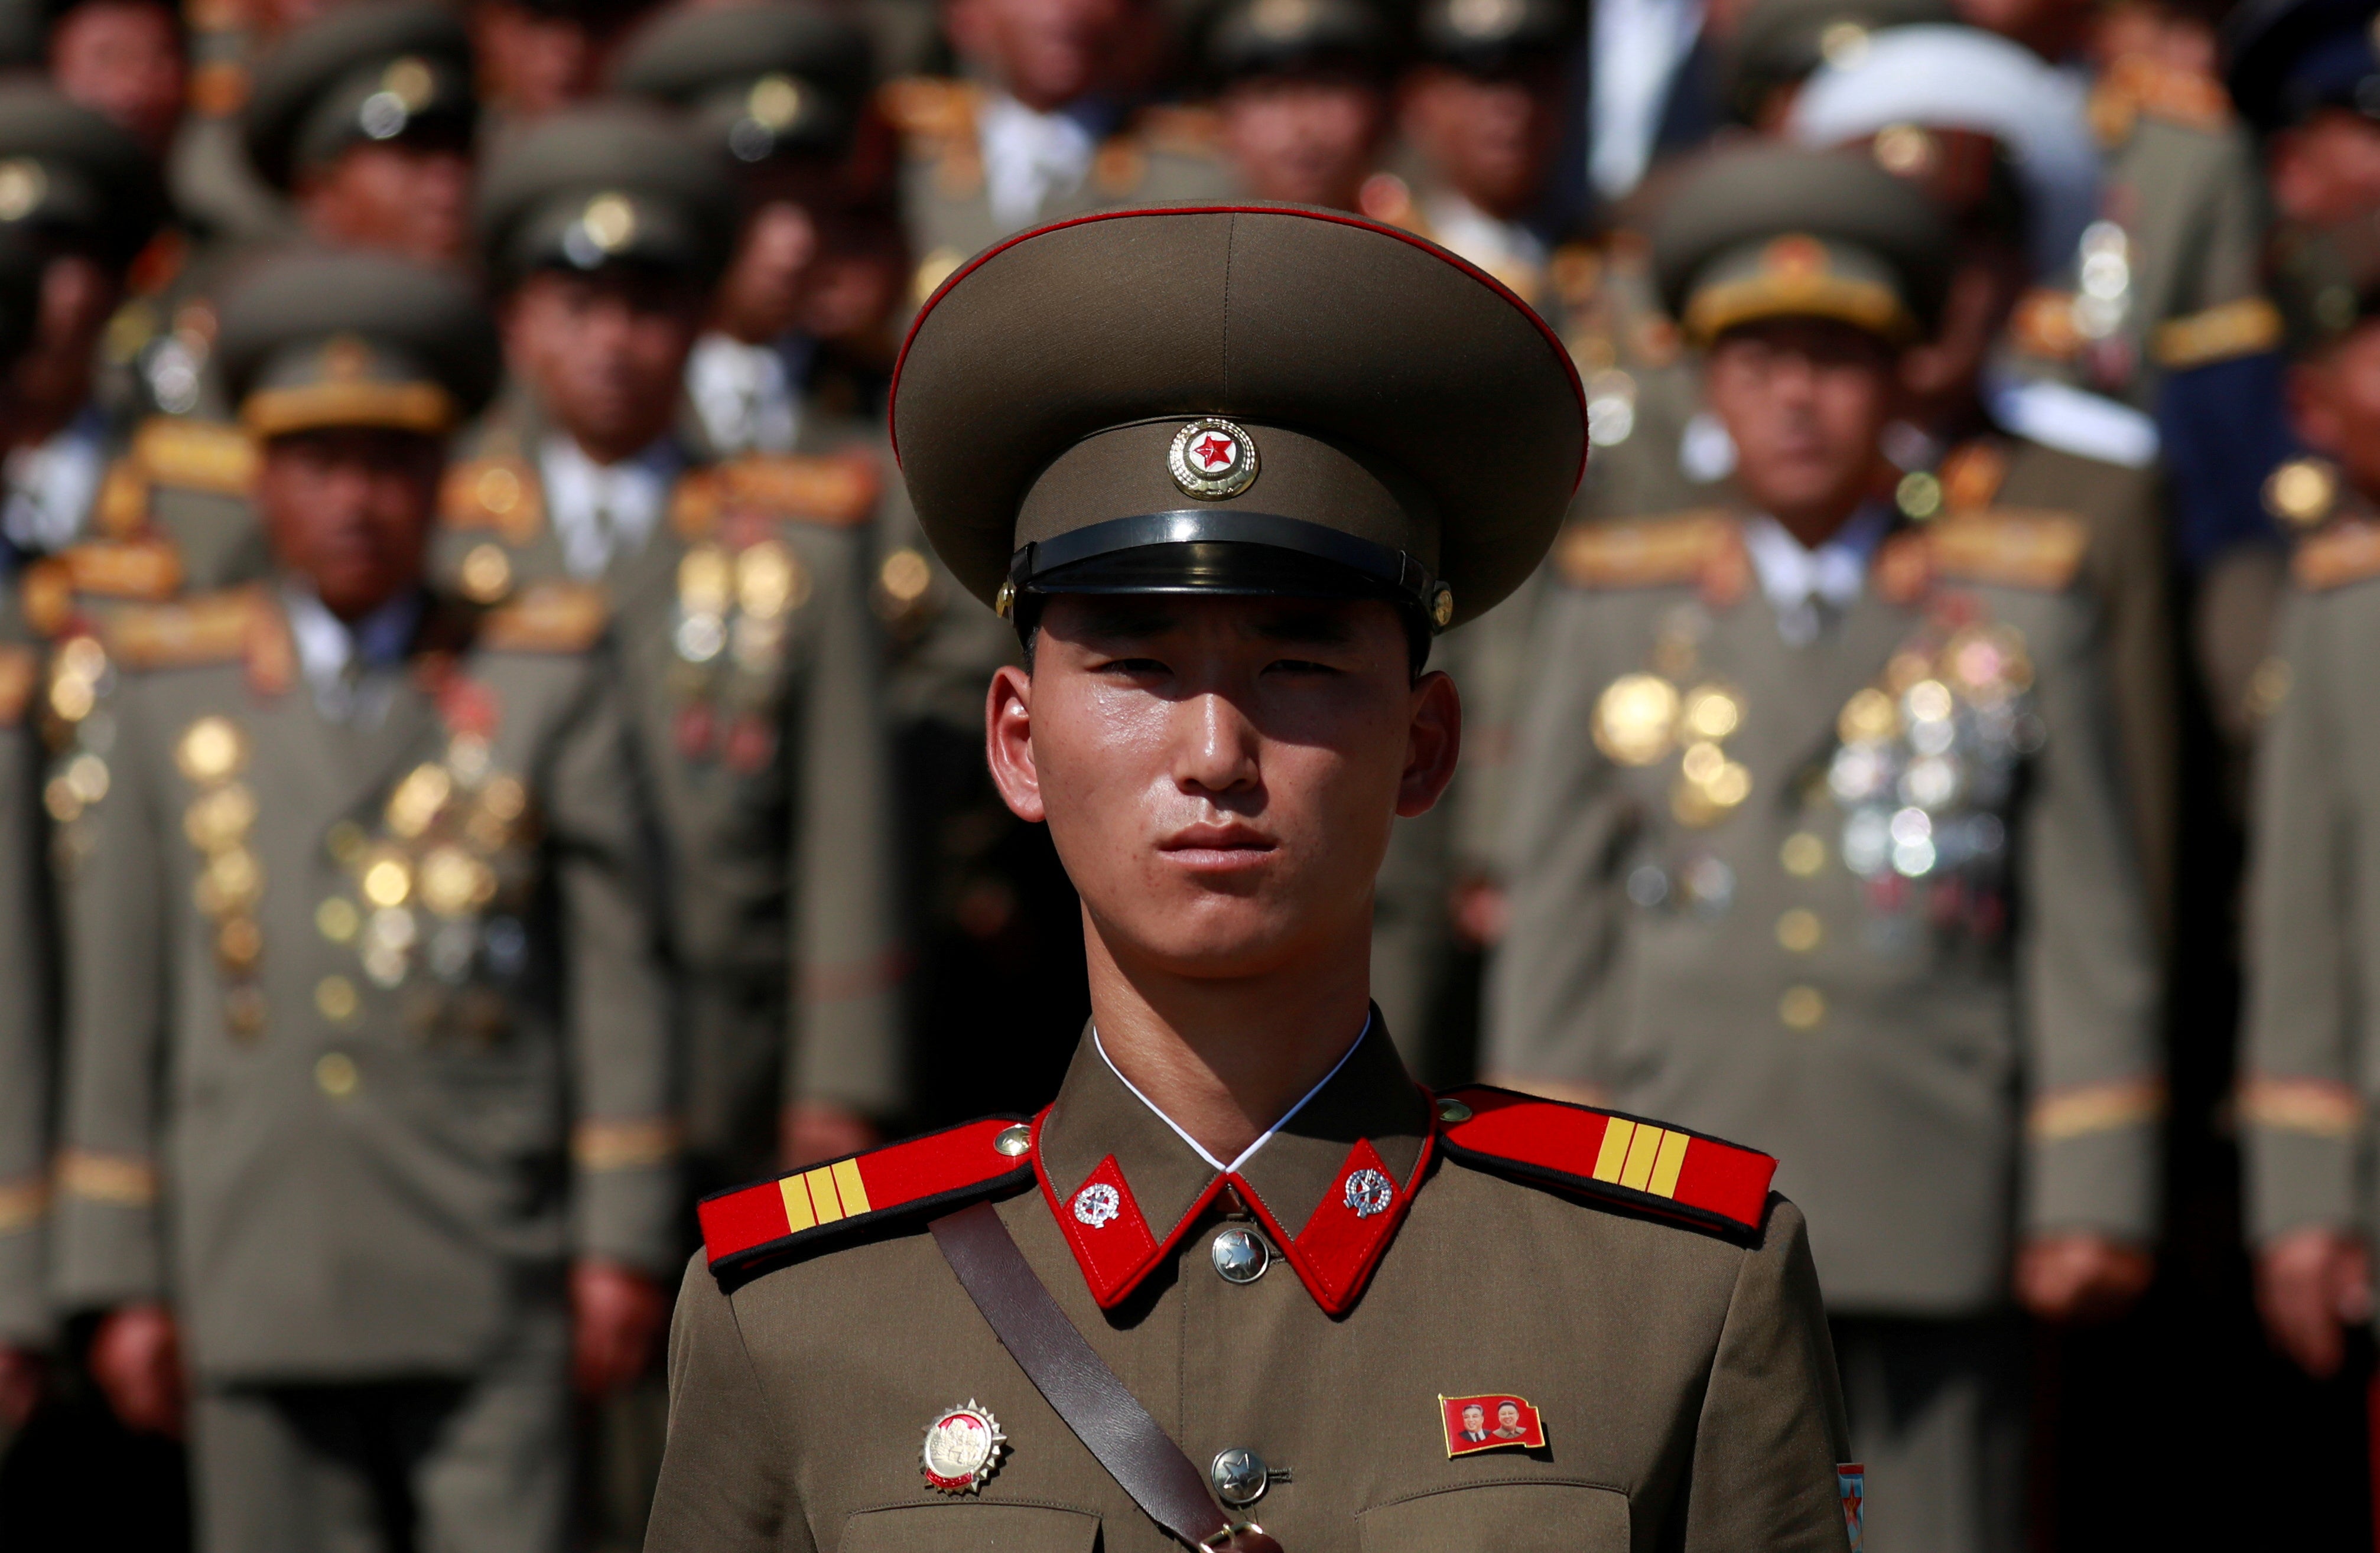 North Korea is thought to be reeling from a devastating economic crisis